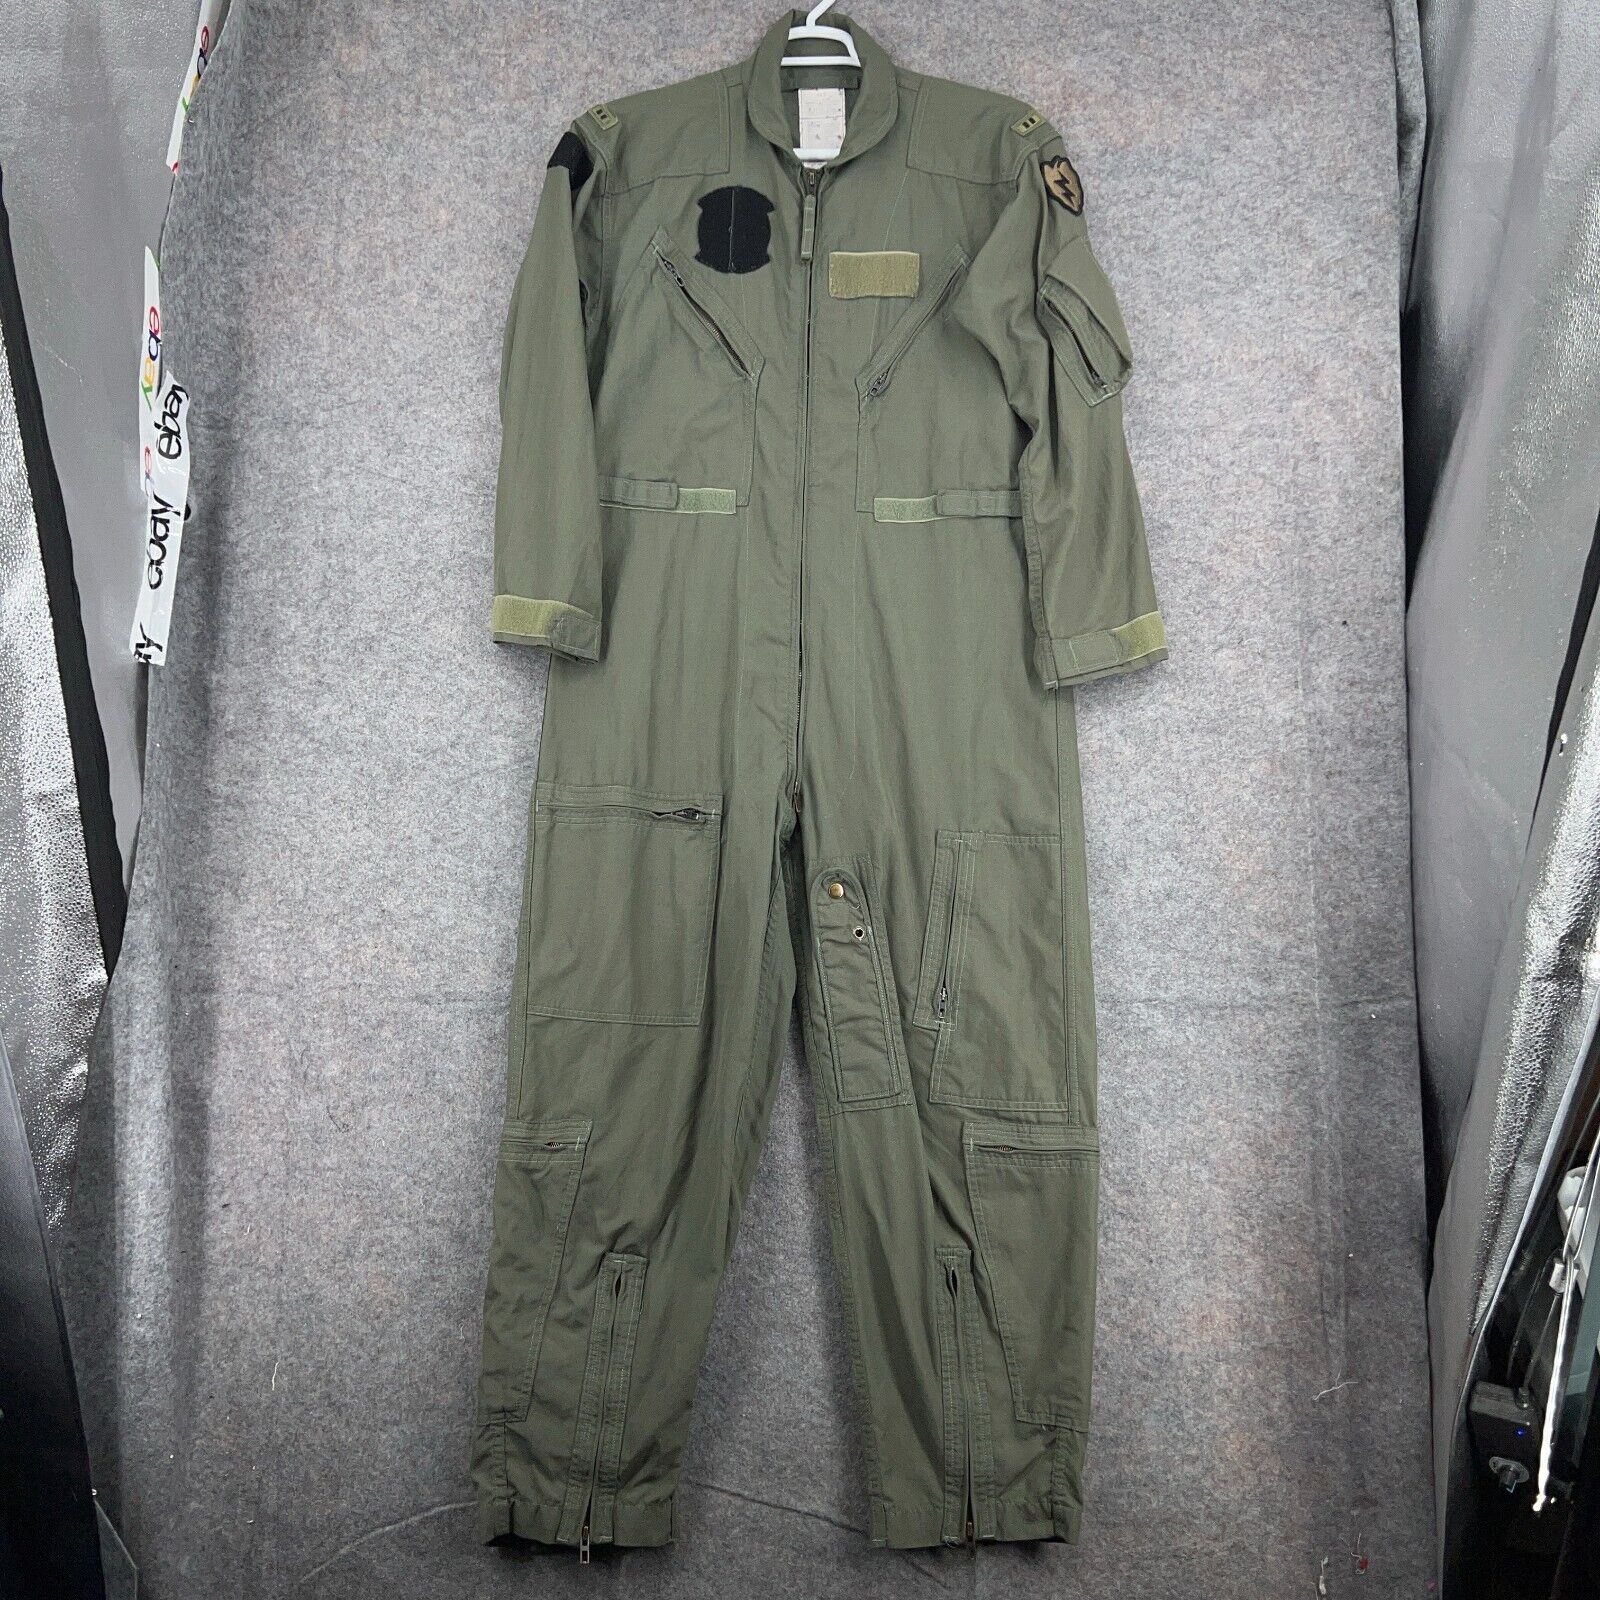 US Military Flyers Coveralls Size 44S Sage Green CWU-27/P Warrant Officer